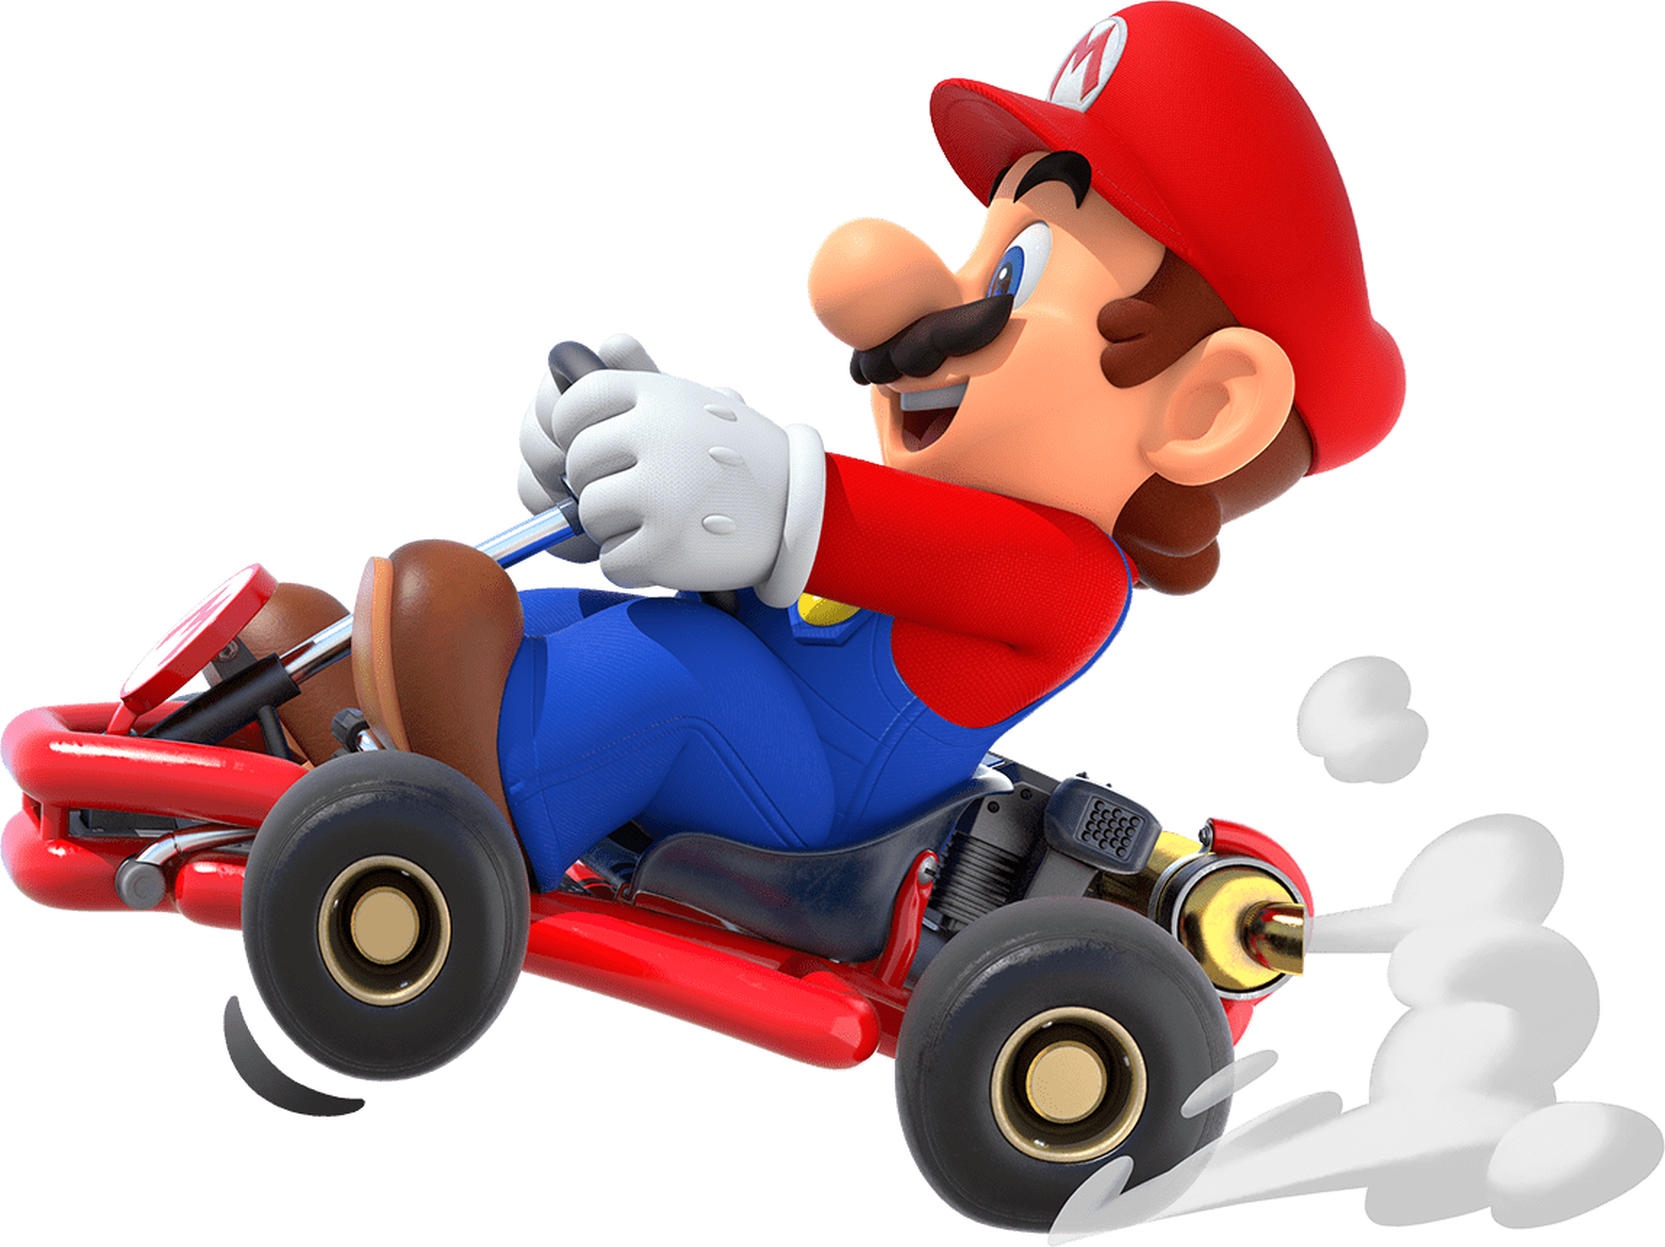 Image for Nintendo is removing loot boxes from Mario Kart Tour which has made the company close to $300 million